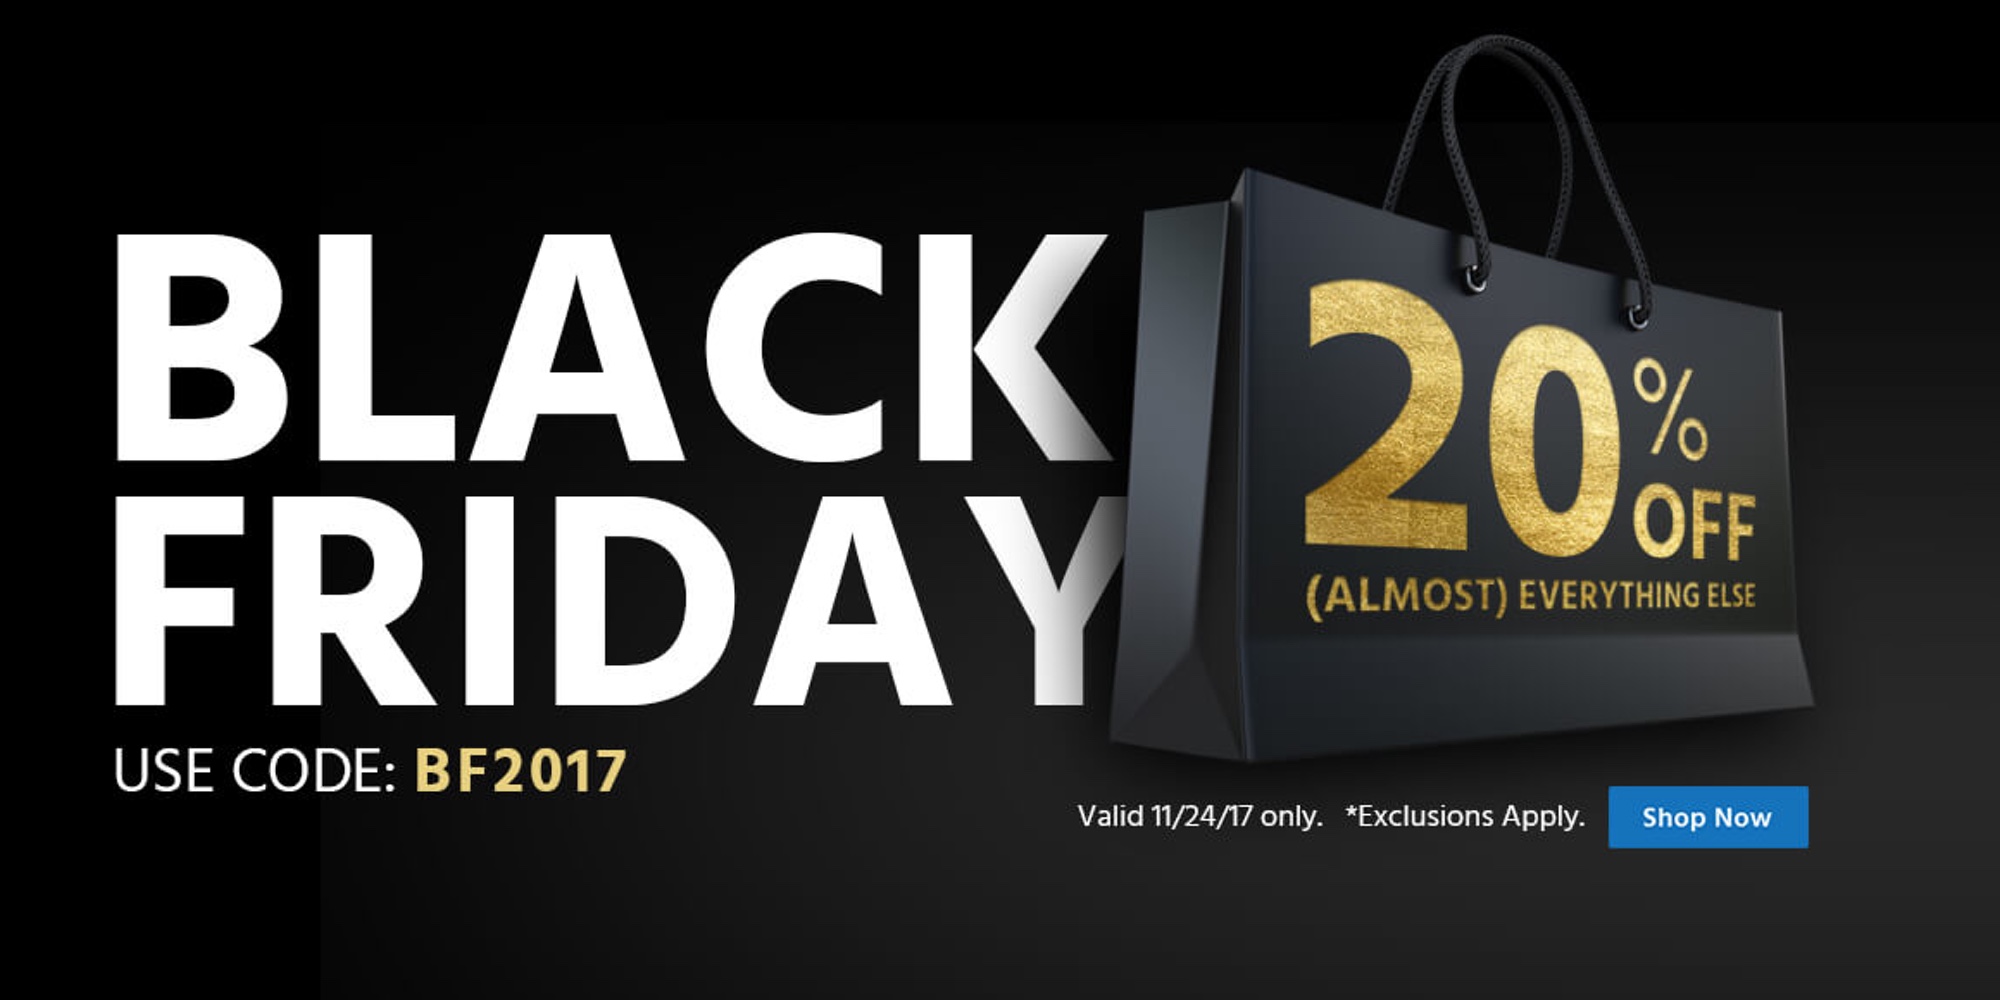 Monoprice Black Friday coupon code takes 20% off sitewide: cables - Will The Switch Deal Stay After Black Friday